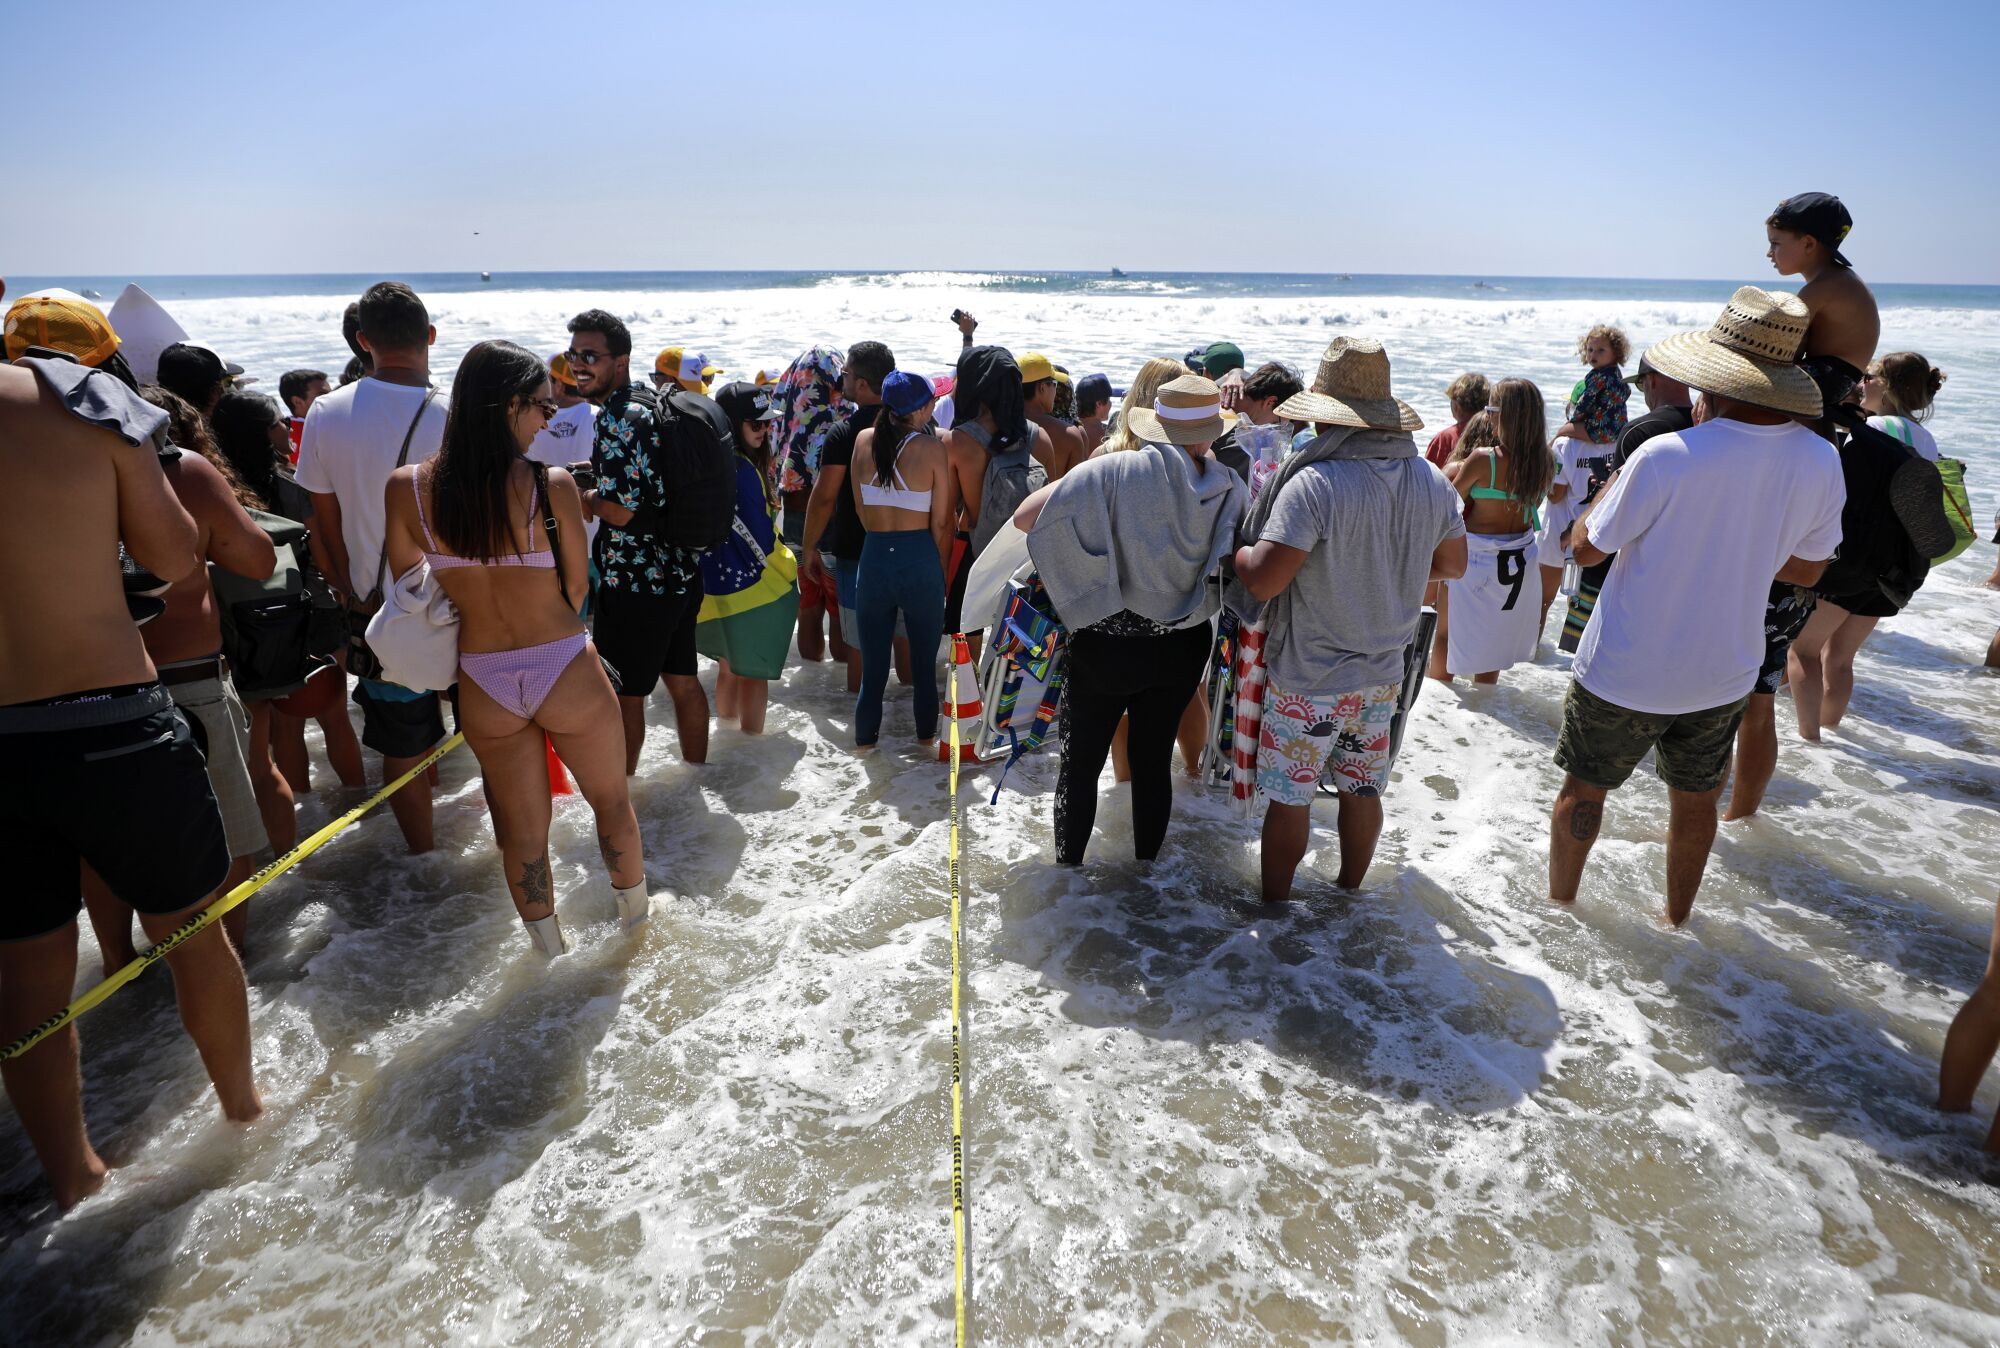 The high tide rolled in as fans lined the beach to watch the World Surf League Finals at Lower Trestles.